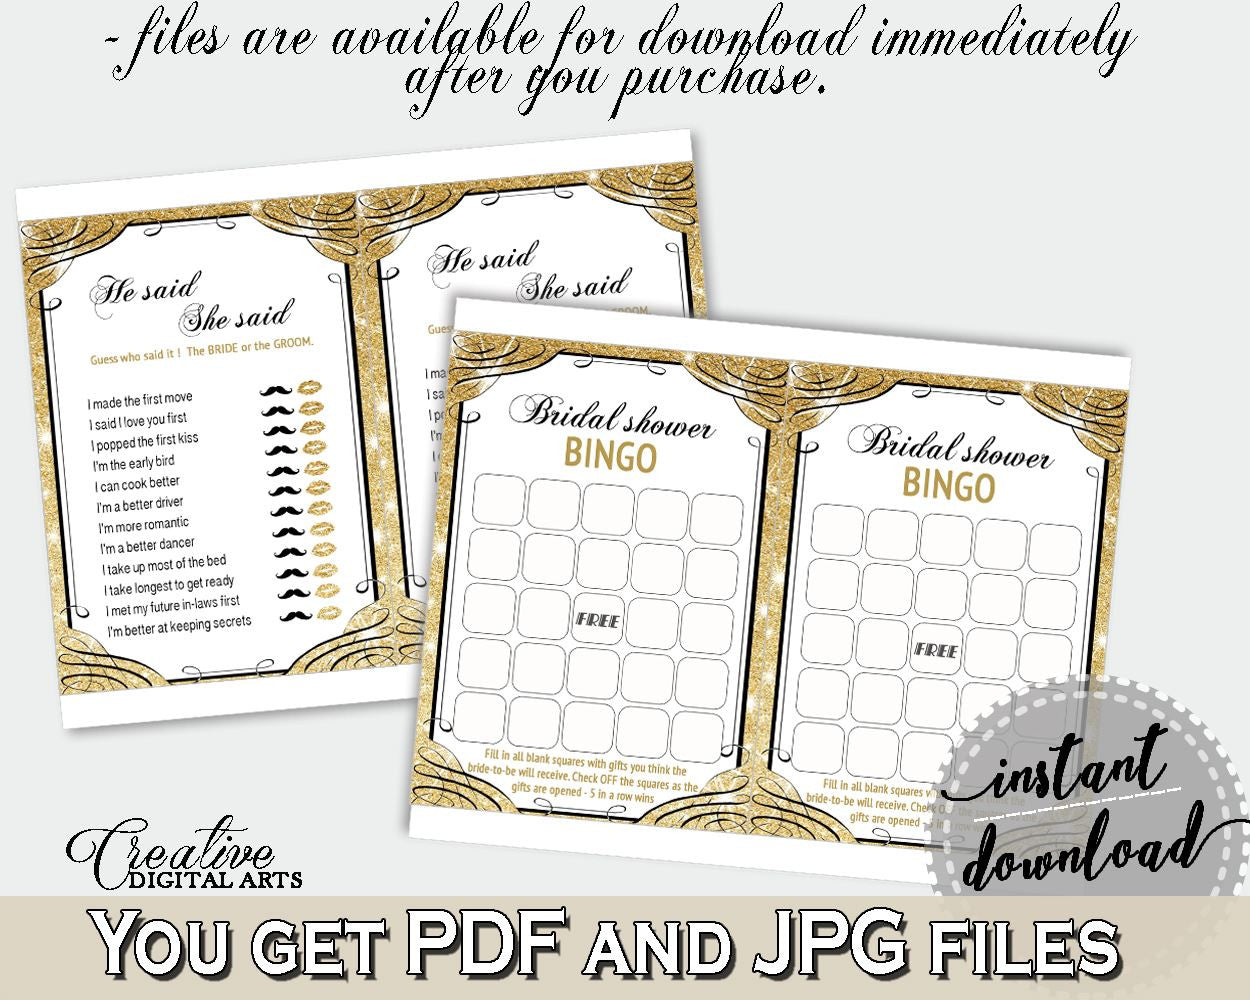 Games Bundle in Glittering Gold Bridal Shower Gold And Yellow Theme, he said she said, aureate shower, party decorations, party plan - JTD7P - Digital Product